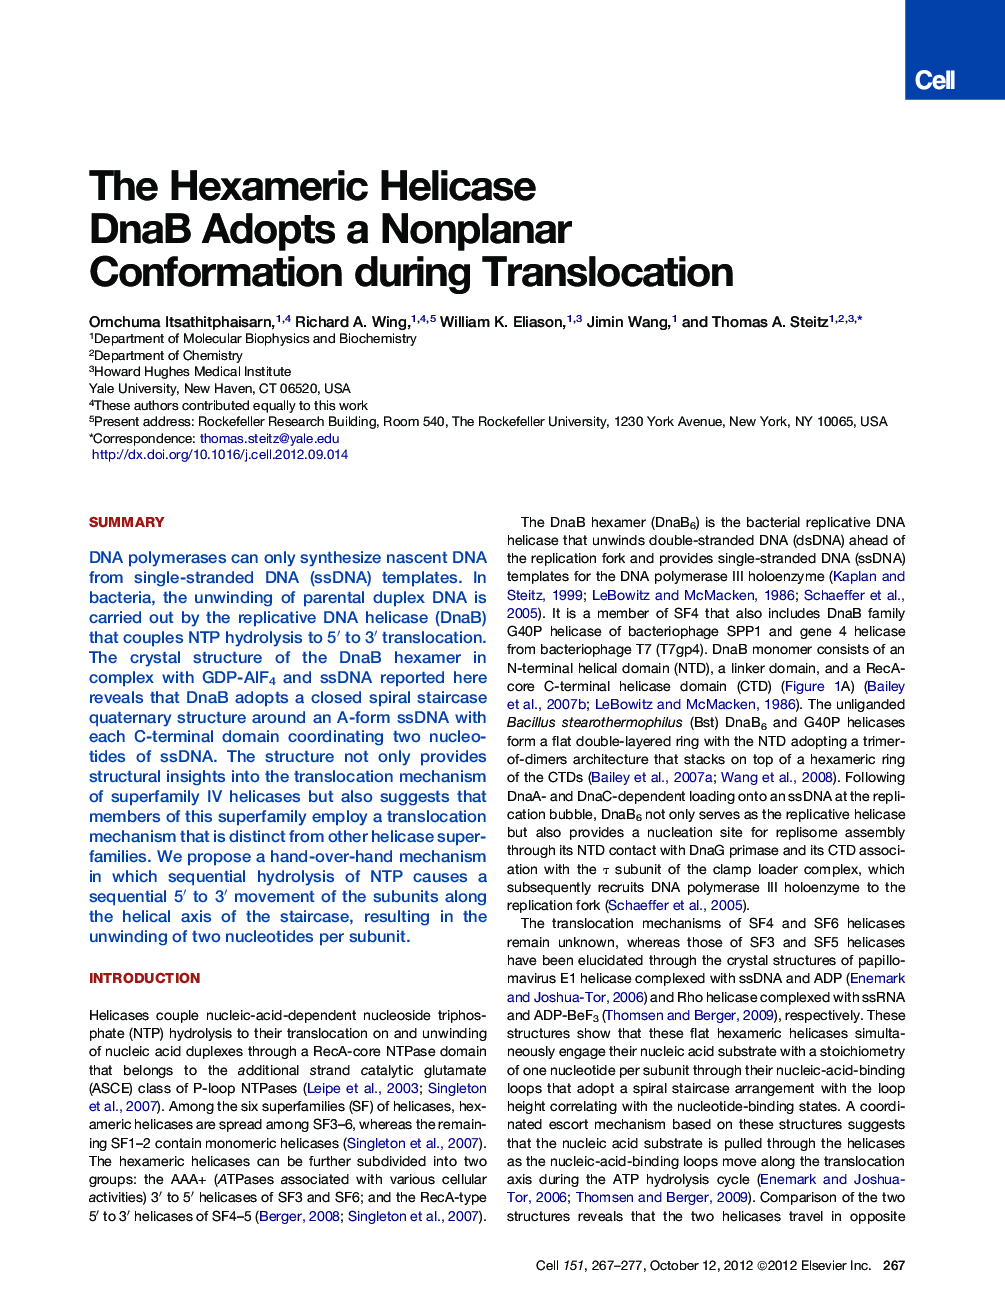 The Hexameric Helicase DnaB Adopts a Nonplanar Conformation during Translocation